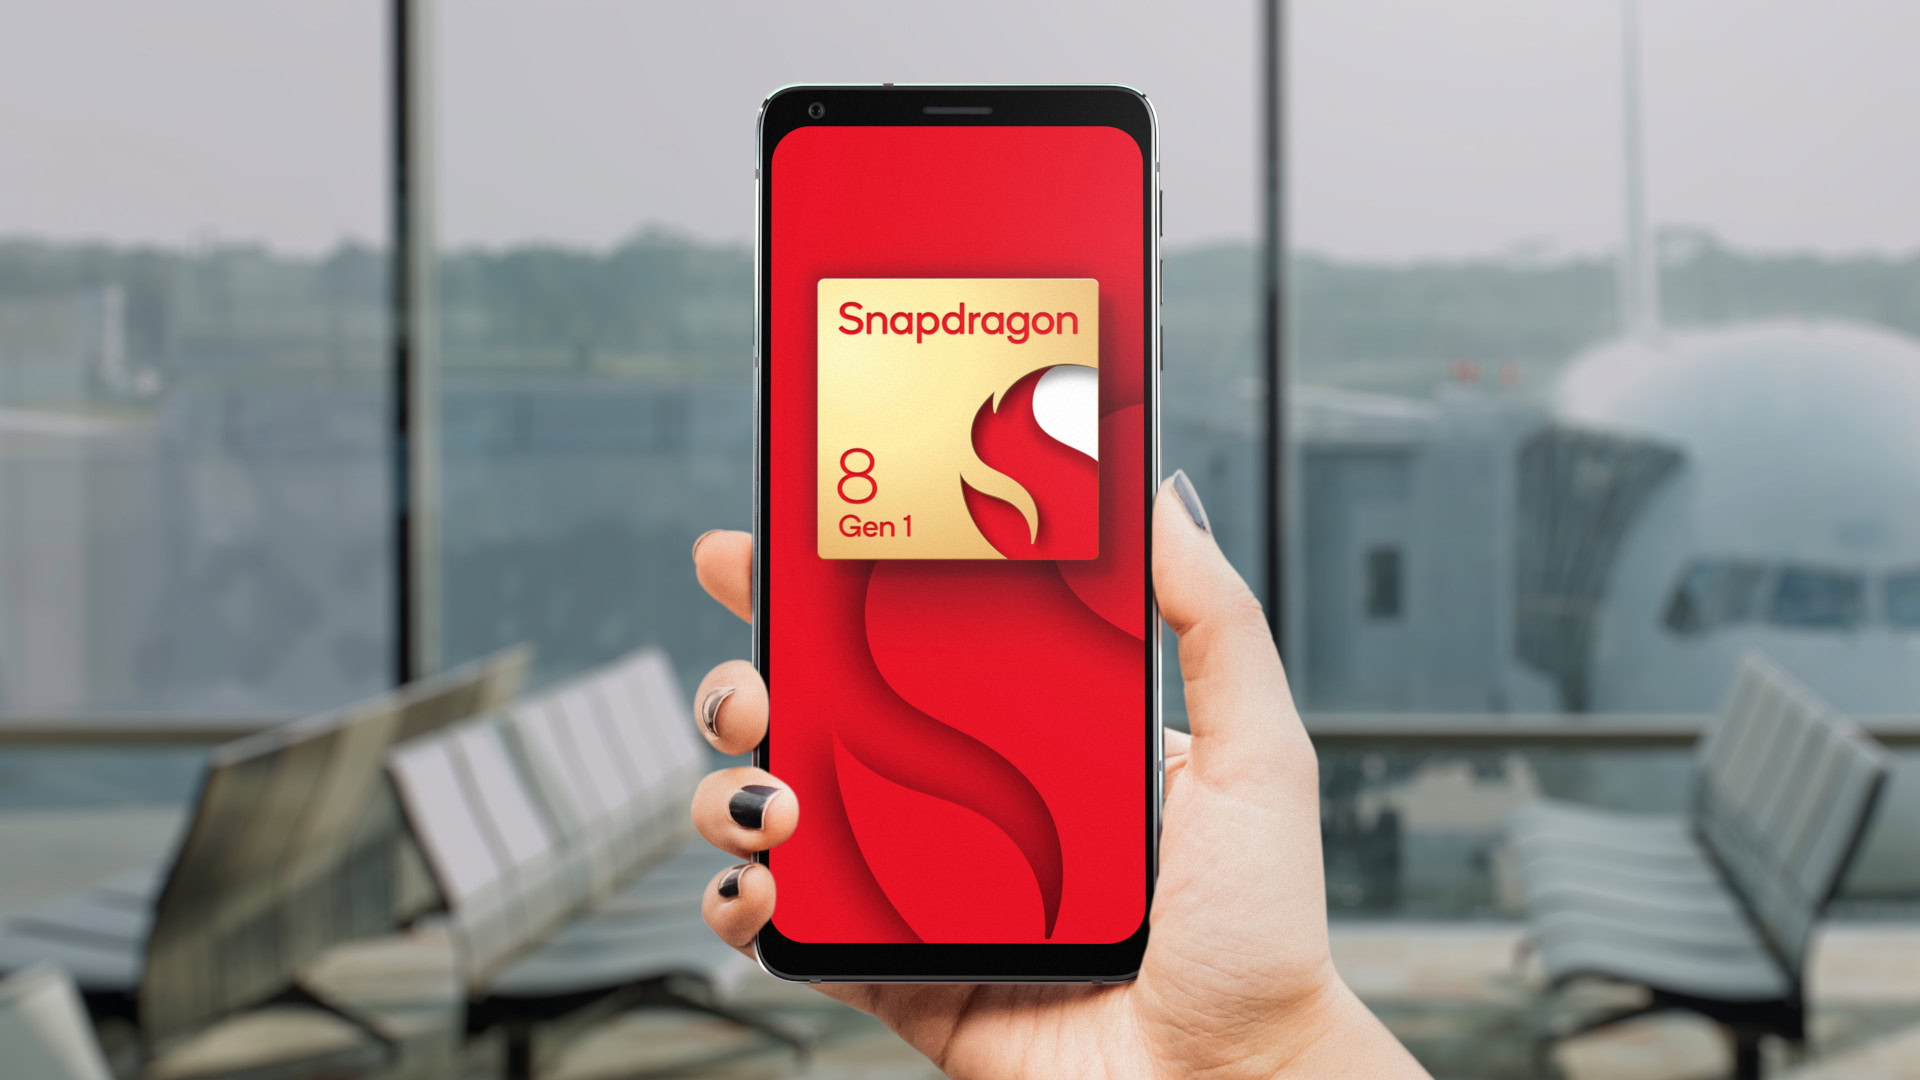 Snapdragon 8 1st Generation Reference Phone